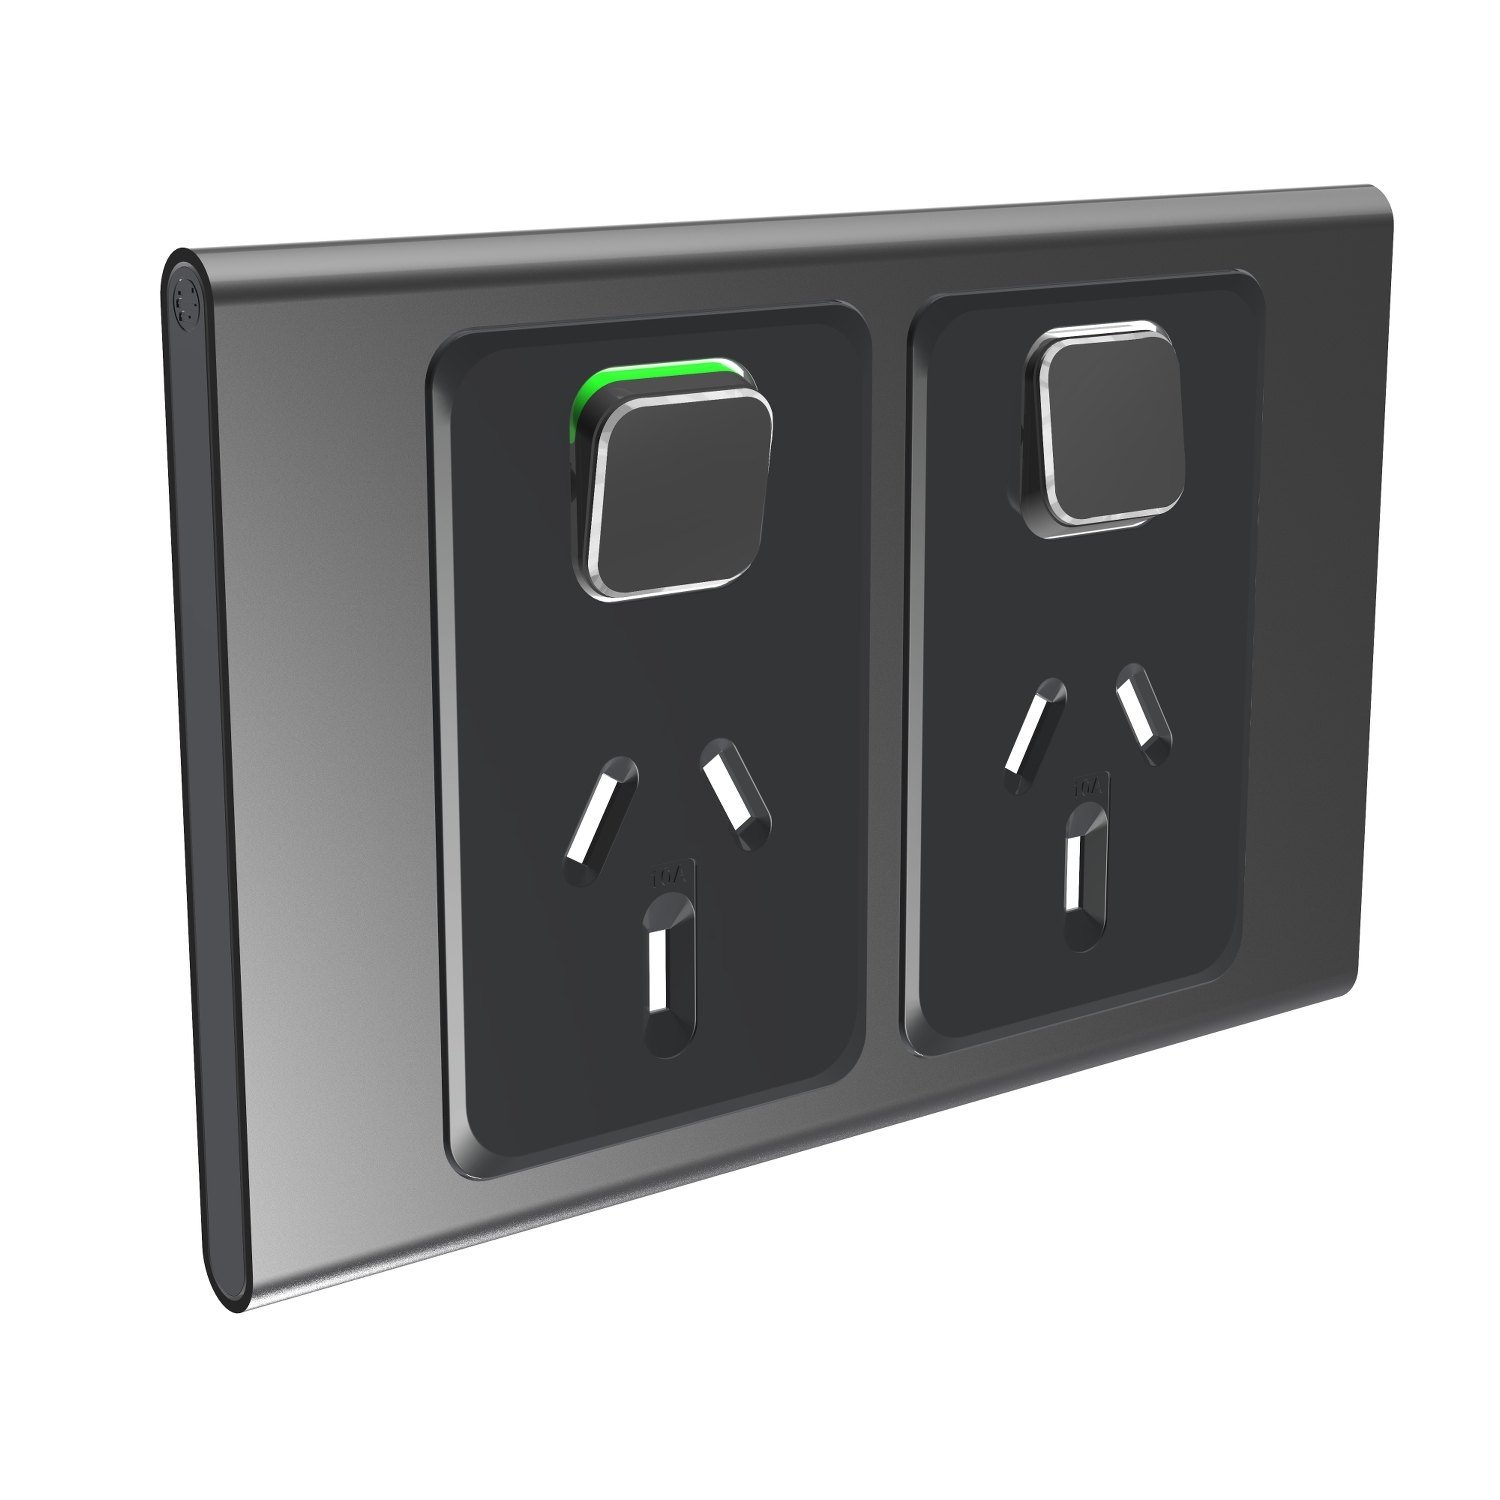 PDLS395C-SH - PDL Iconic Styl, cover frame, 2 switches & 2 sockets, horizontal - Silver Shadow